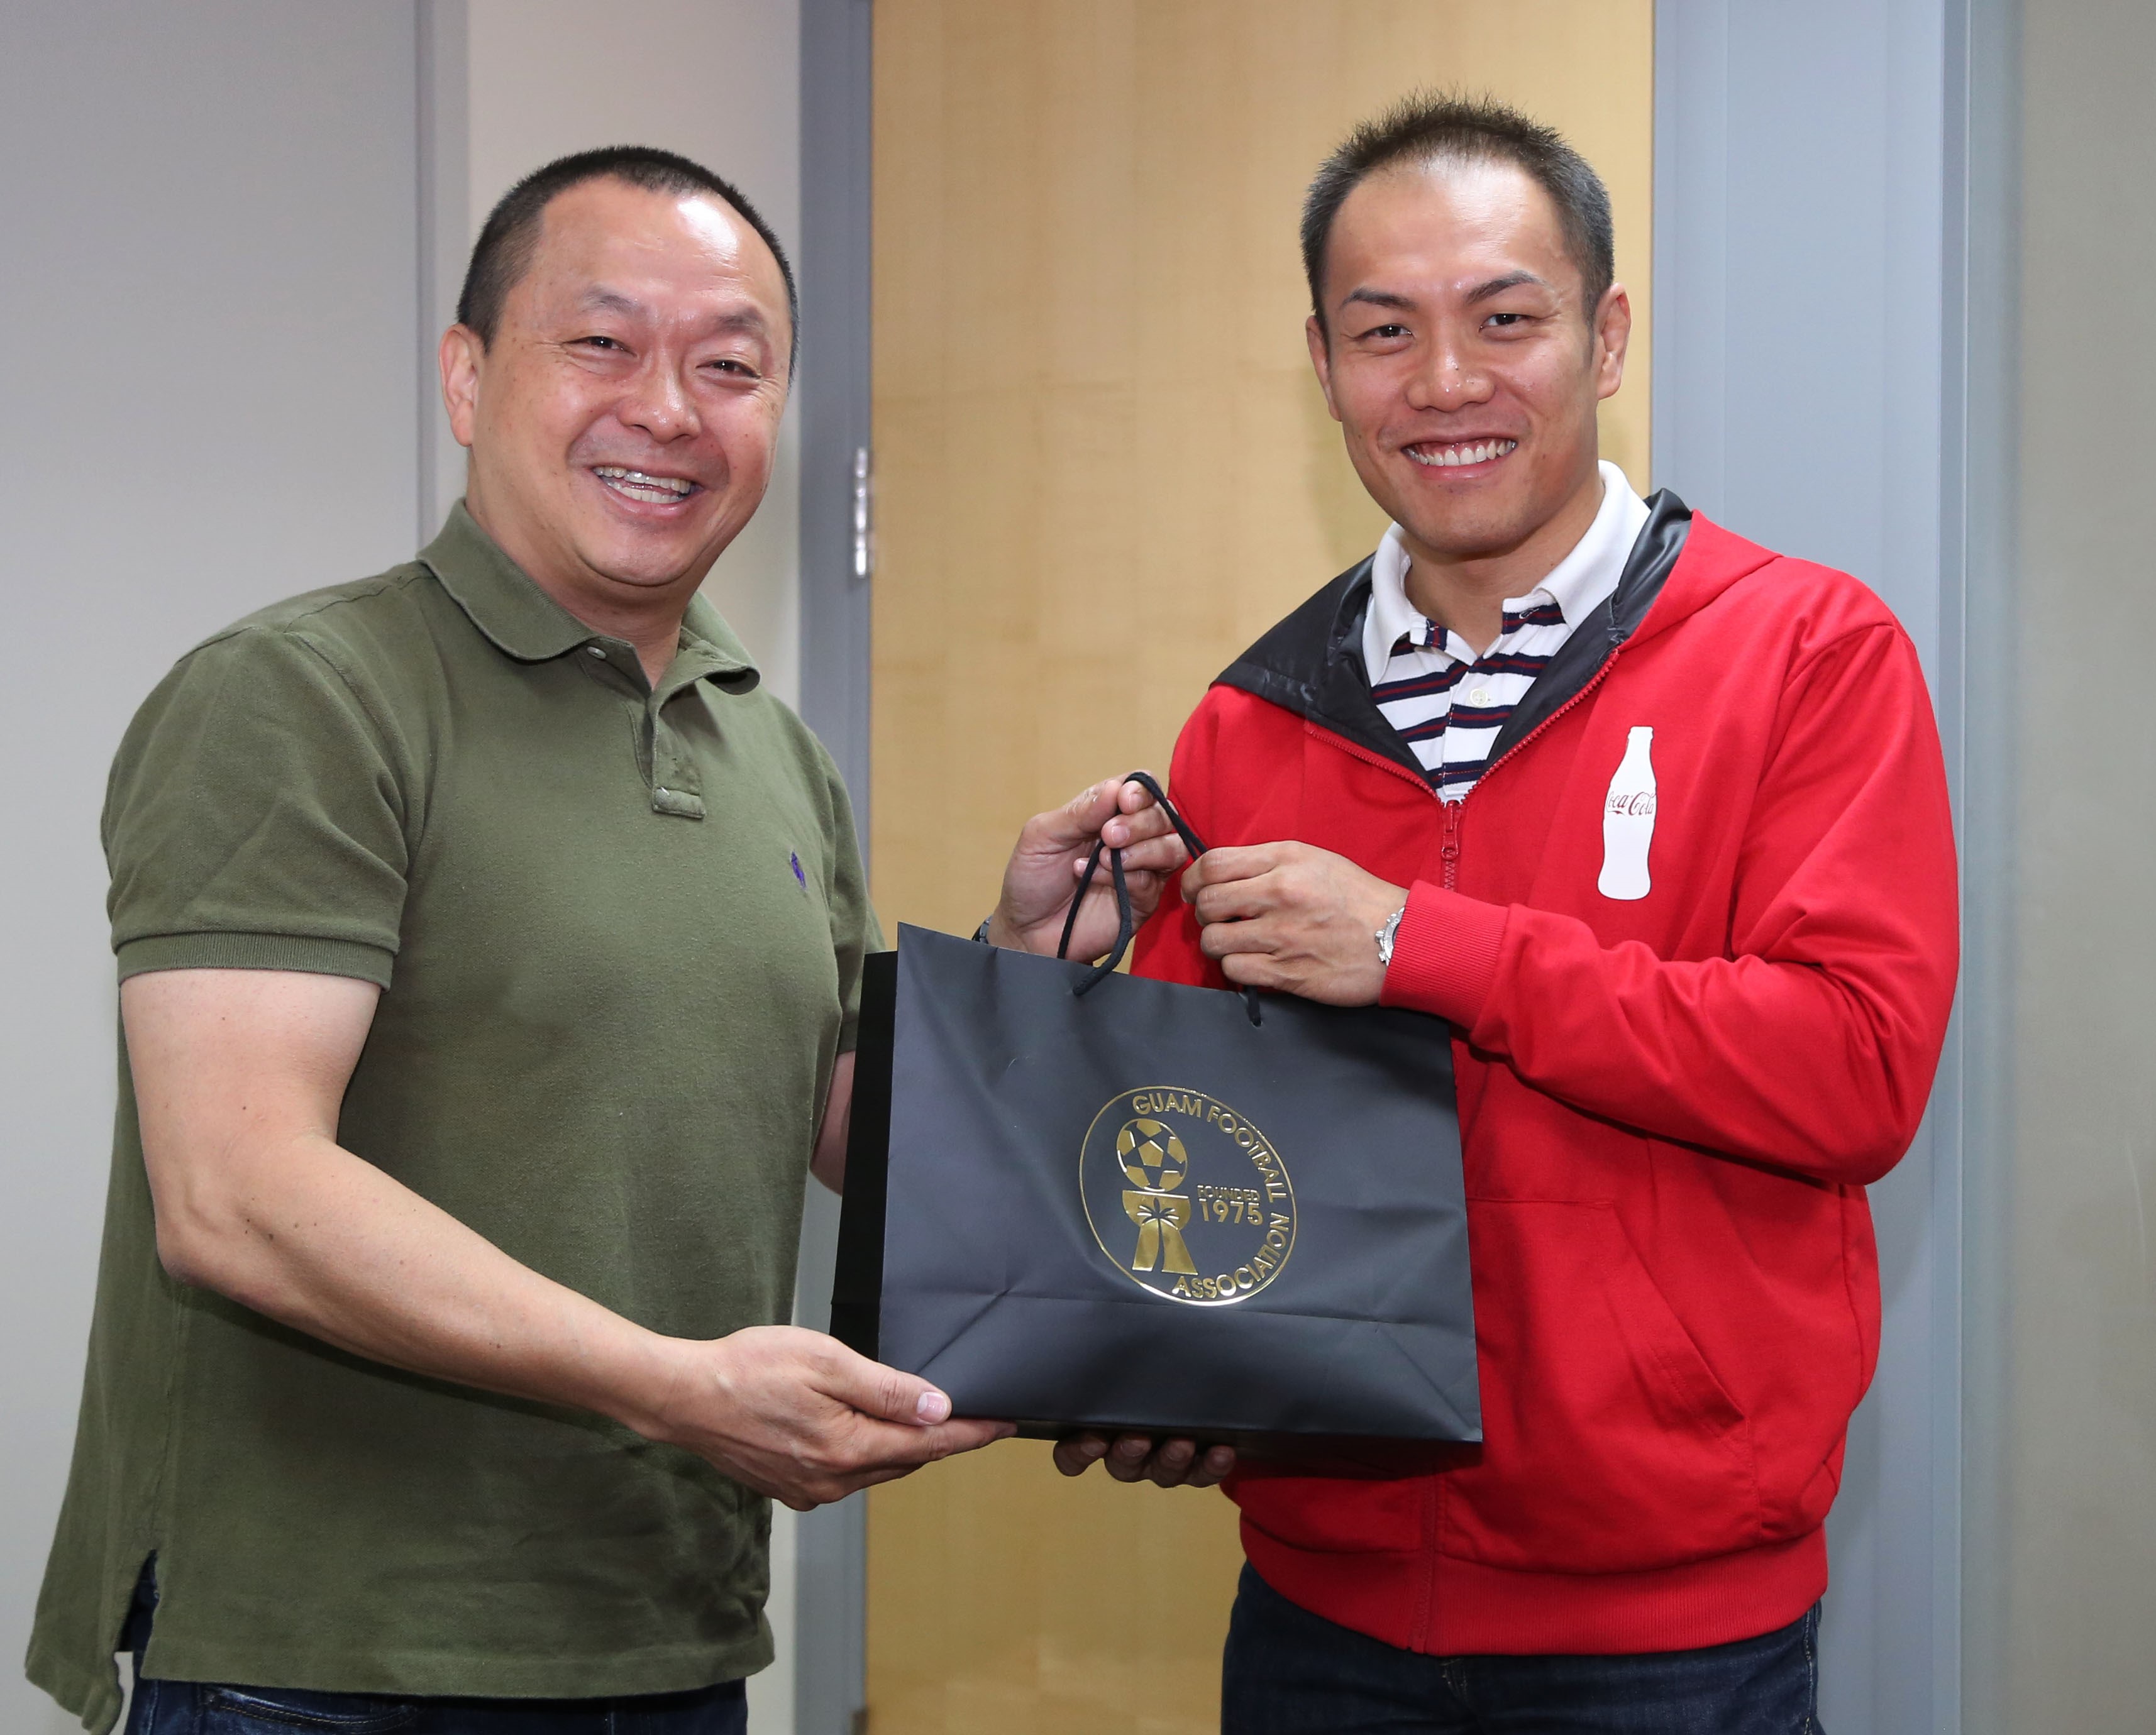 (Friday, February 27, 2015; Barrigada Heights, Guam) In the photo is Guam Football Association President Richard Lai (left) presenting a gift from GFA to Marcos Fong, CEO of Foremost Foods, Inc. & Coca-Cola Beverage Company (Guam) after signing a two-year partnership.